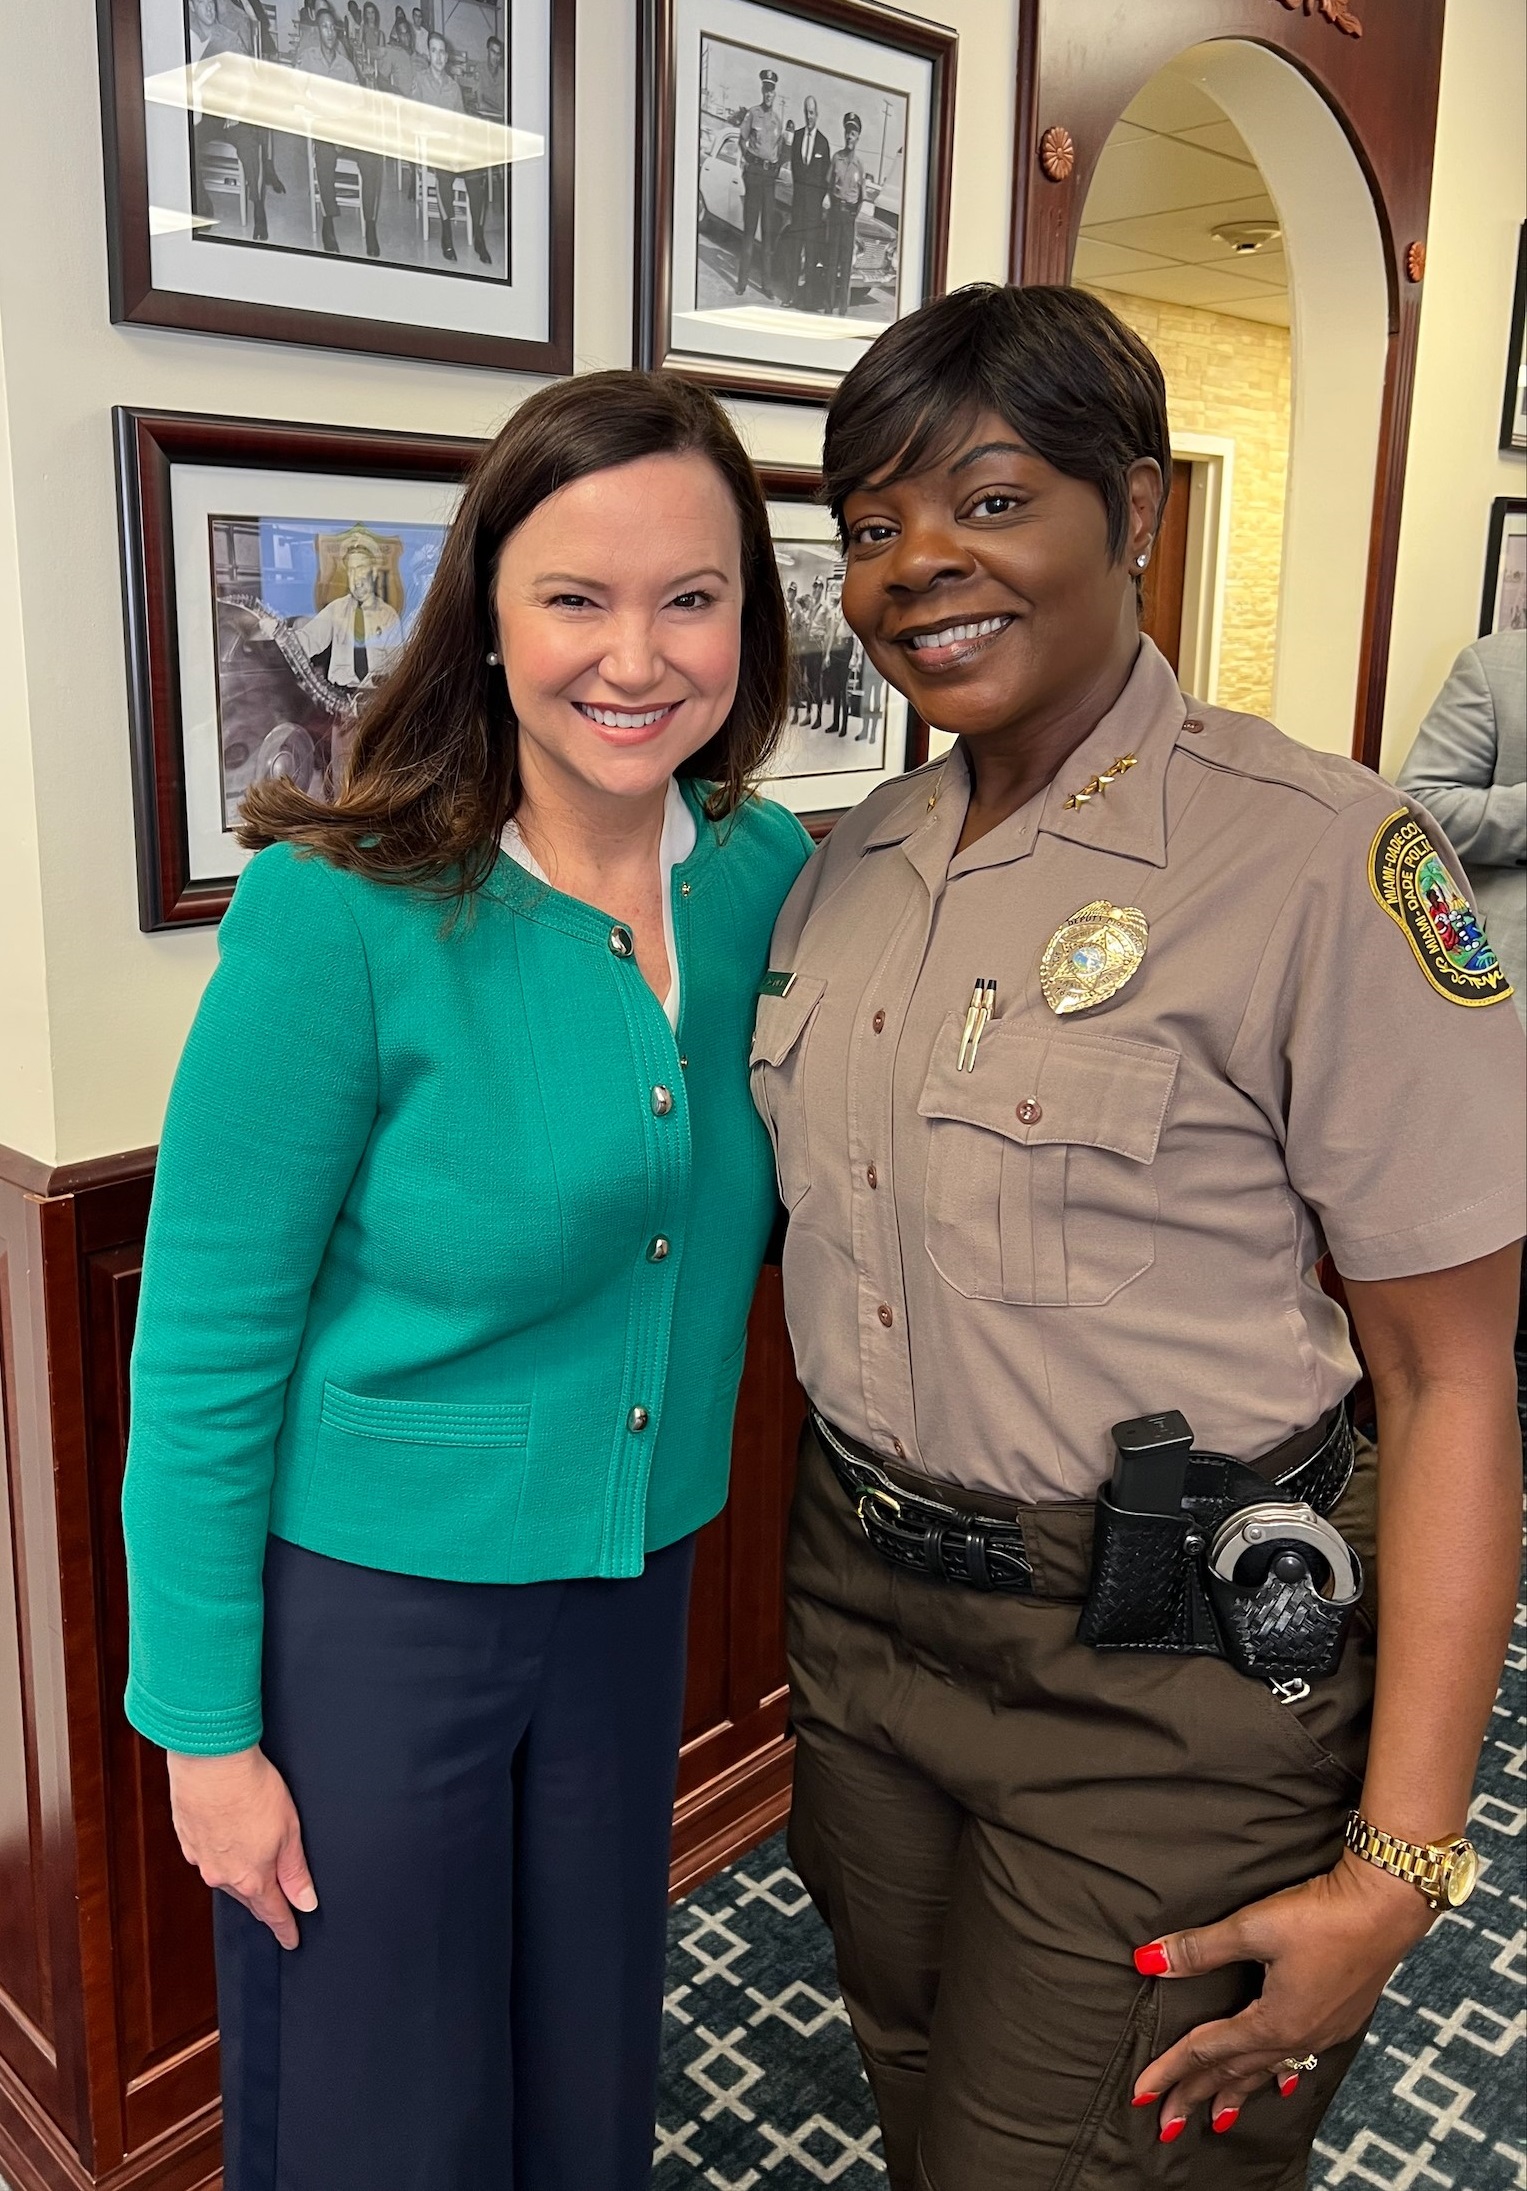 Deputy Director Stephanie Daniels of the Miami-Dade Police Department